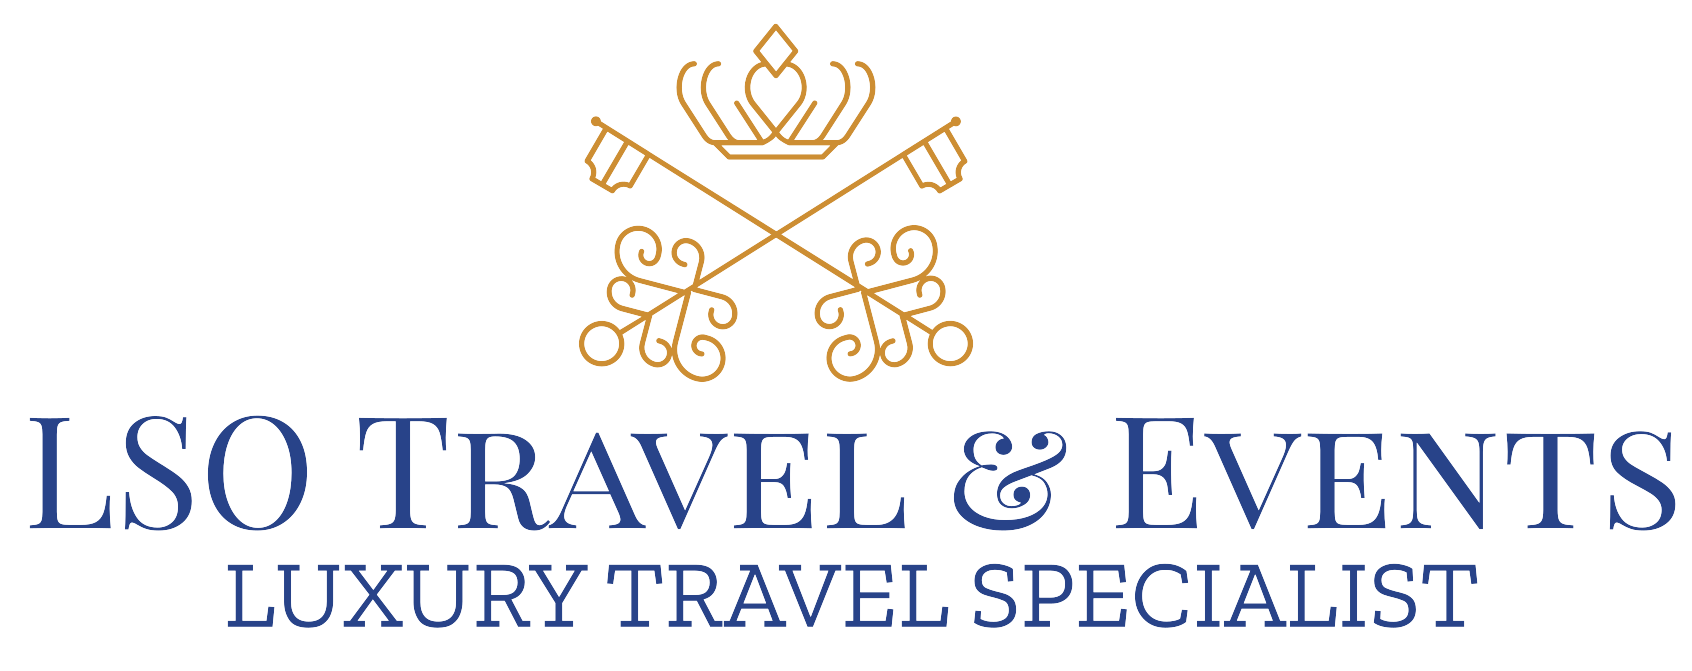 LSO TRAVEL & Events Logo